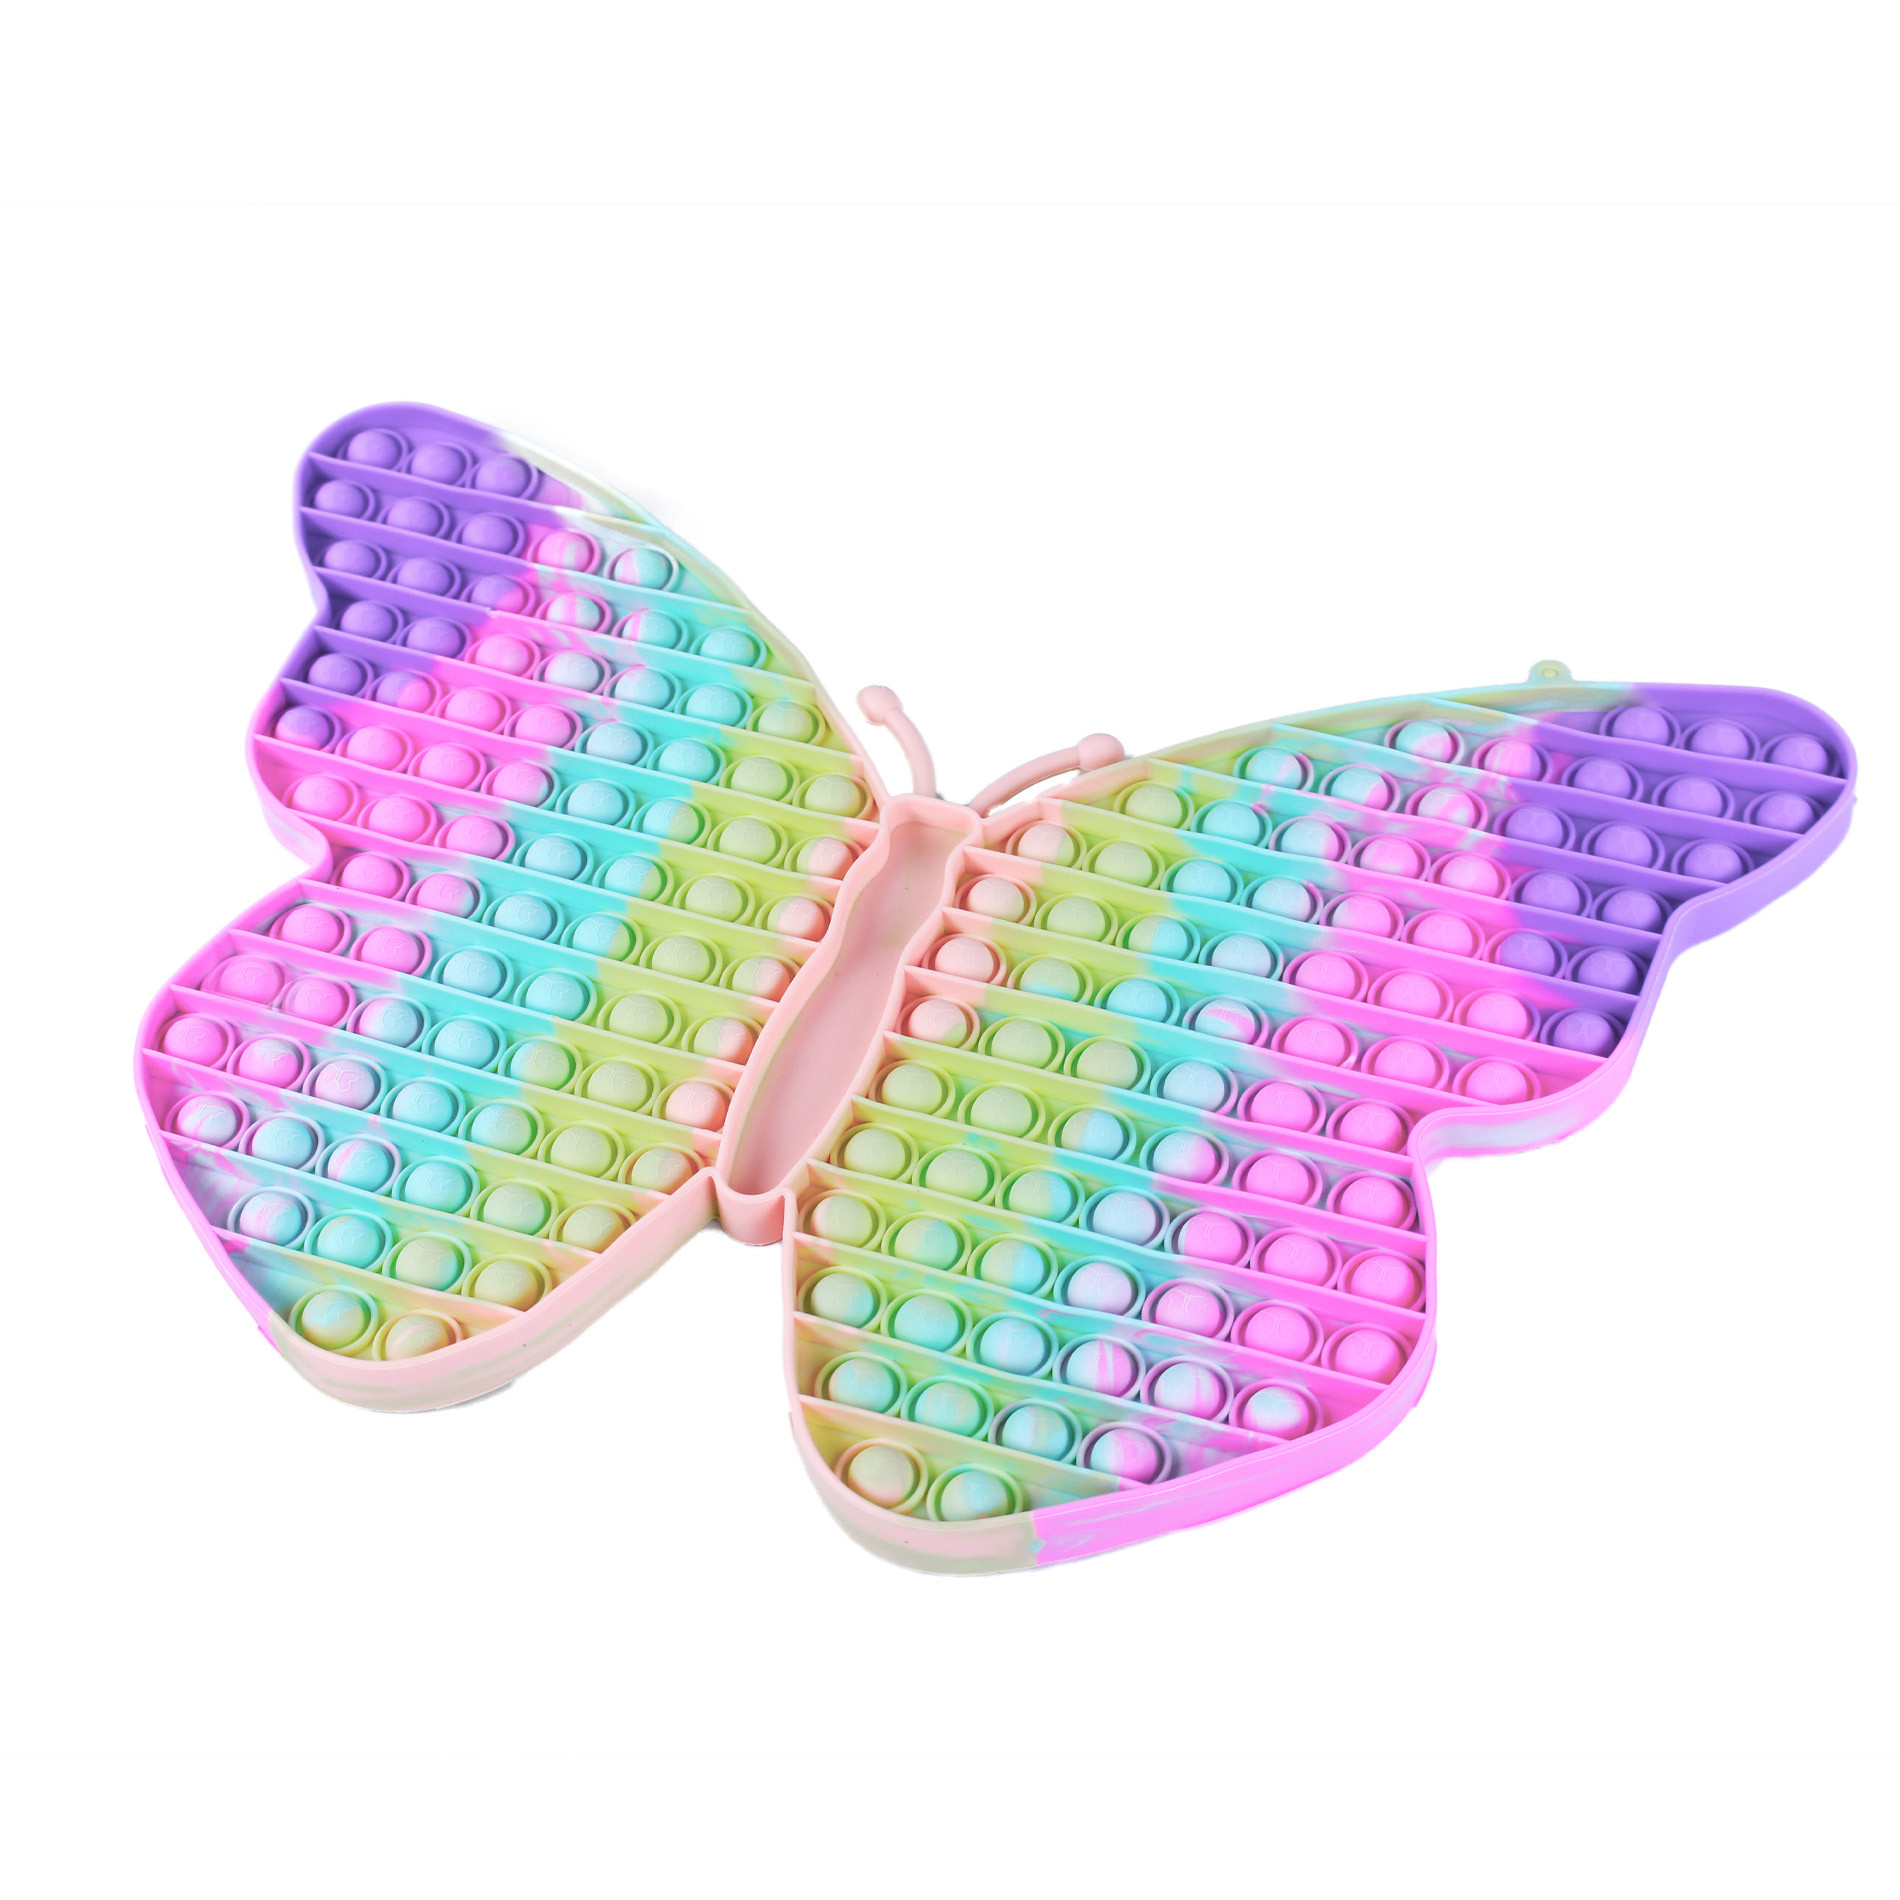 Gigant rainbow butterfly 190 bubbles